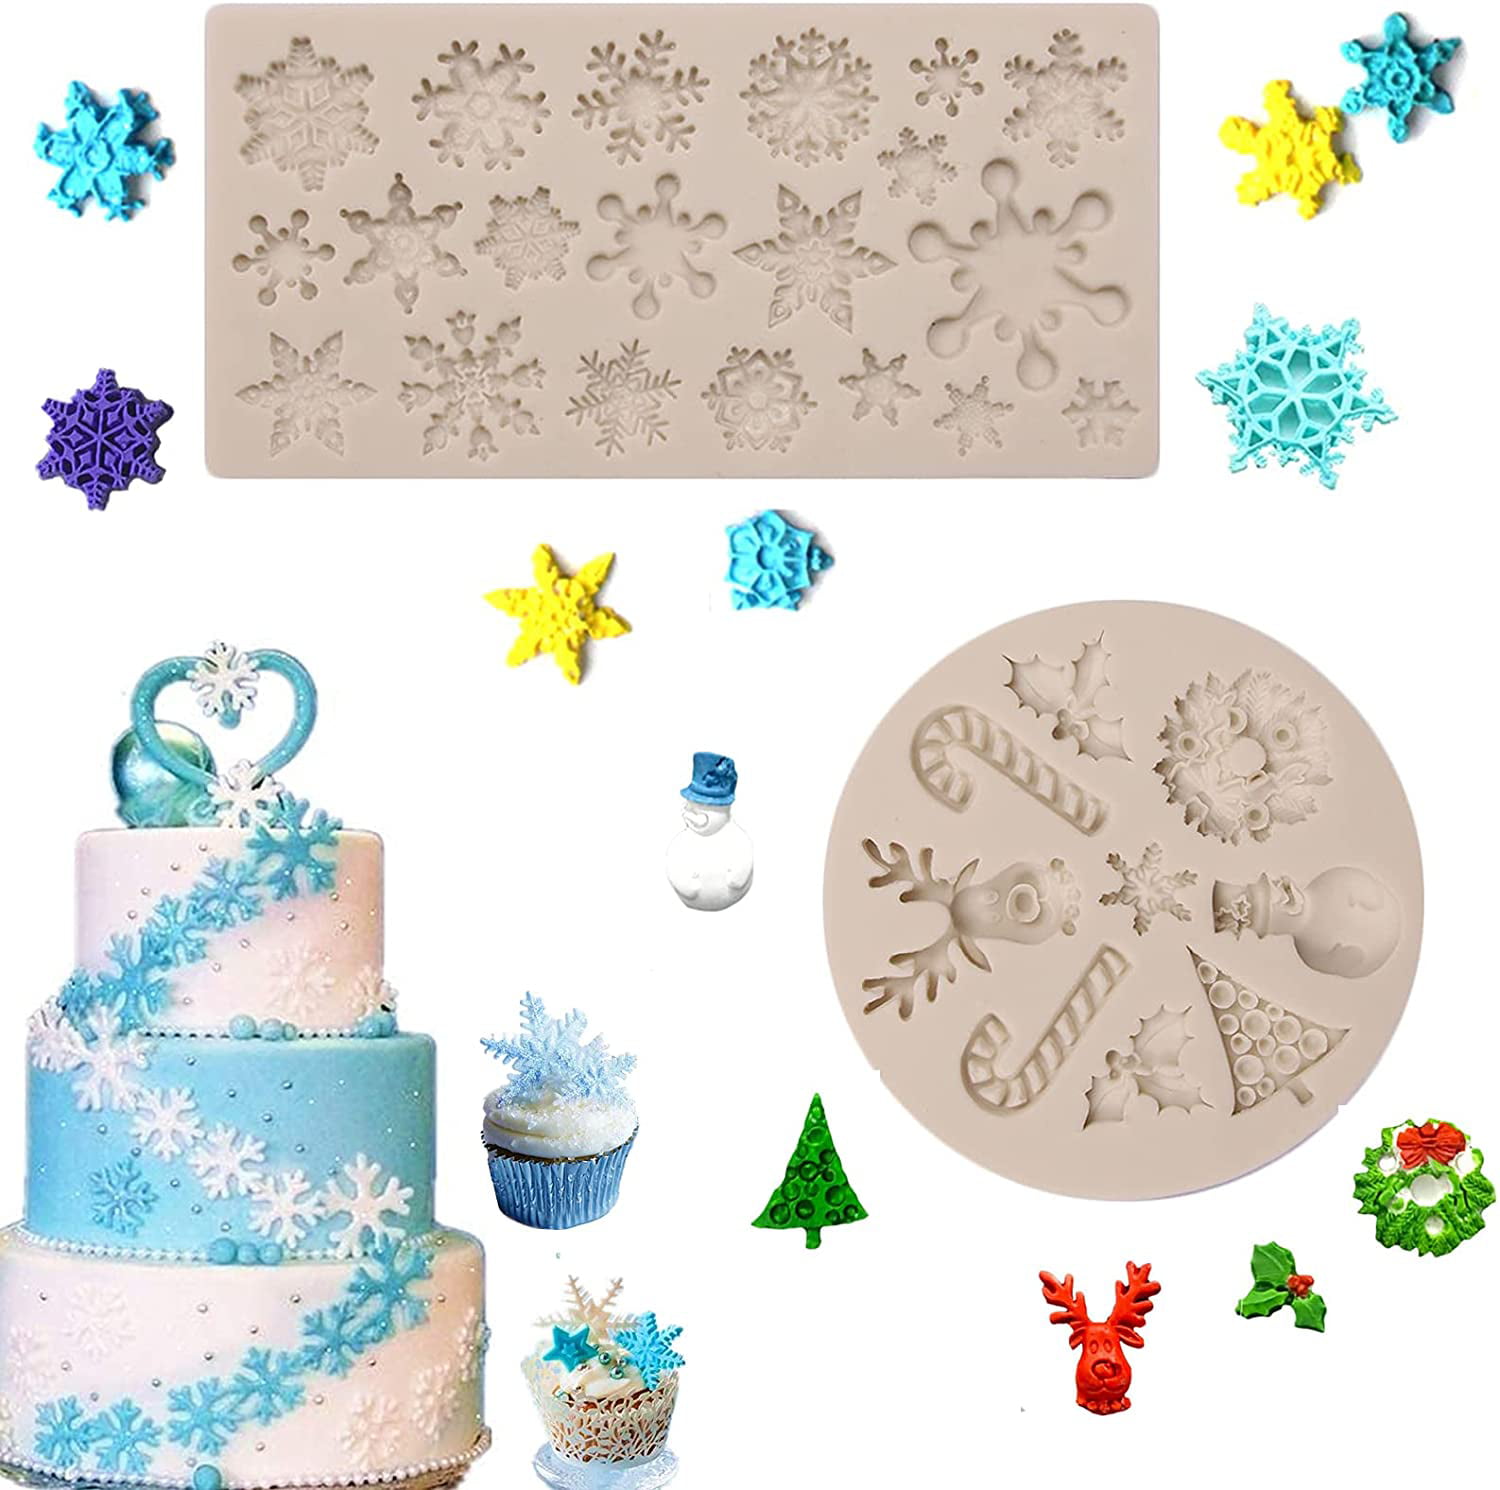 Details about   Mini Rose Flower Silicone Cake Fondant Decorating Mold Resin Clay Craft DIY Mold 